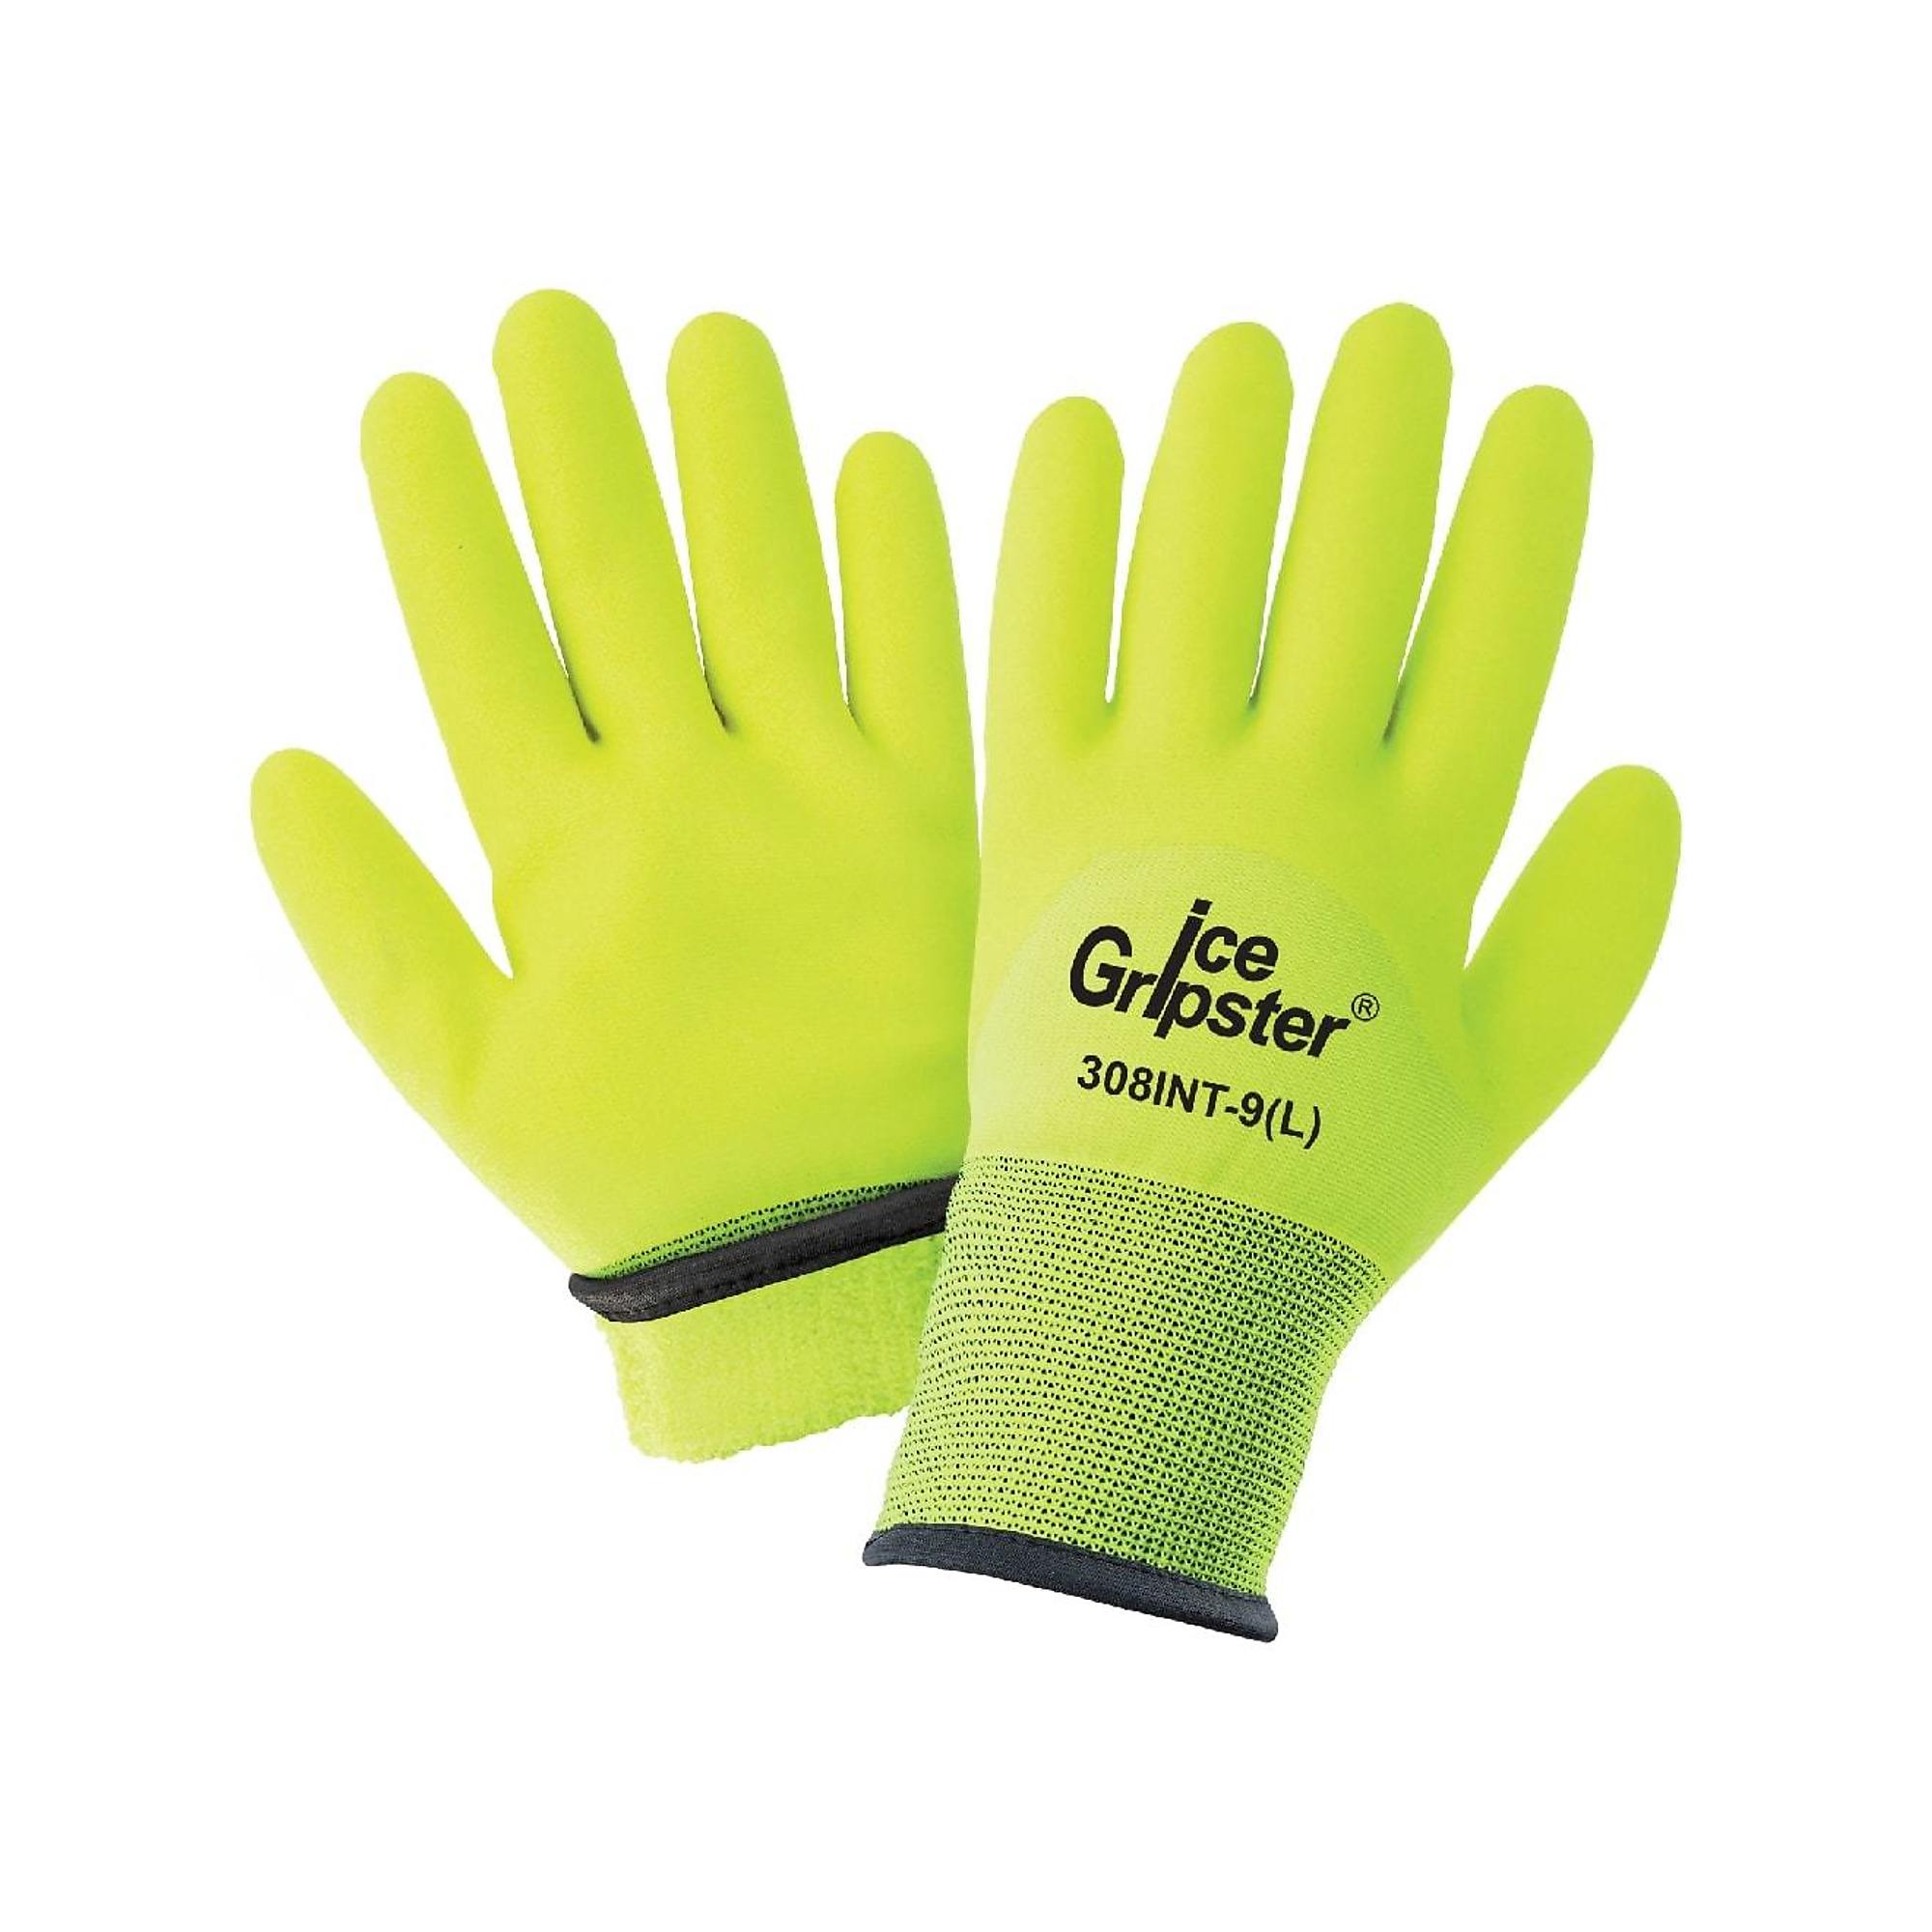 FrogWear Ice Gripster , HV Yel, Insulated, PVC Dip,Cut Resistant A2 Gloves- 12 Pairs, Size XL, Color High Visibility Yellow/Green, Included (qty.) 12